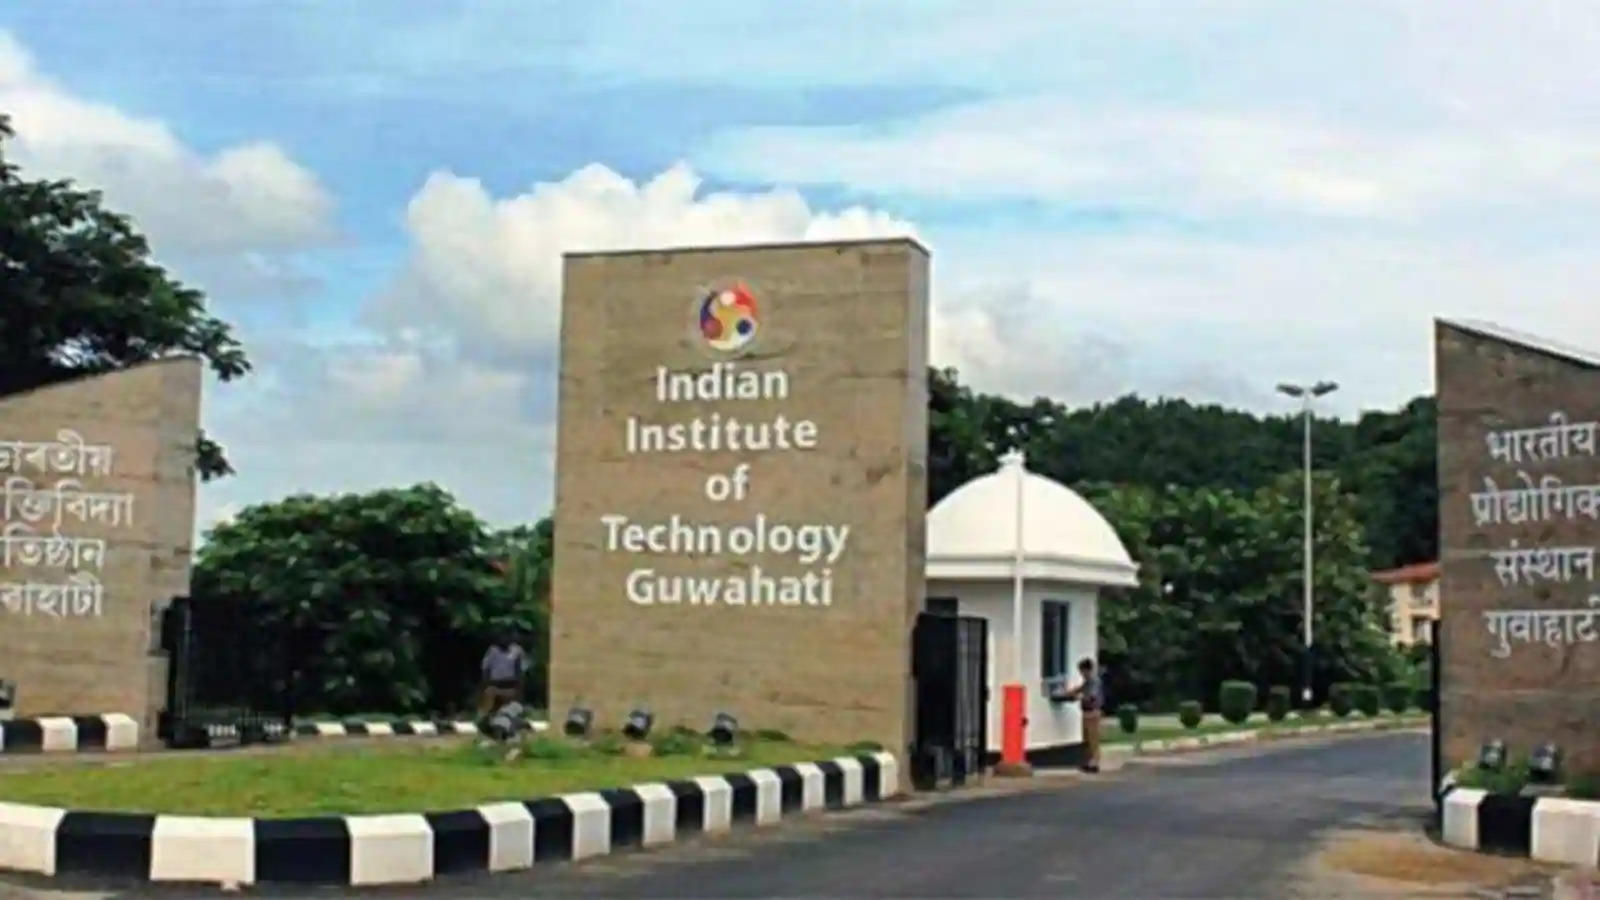 IIT Guwahati develops secure Integrated Circuits for next generation computing